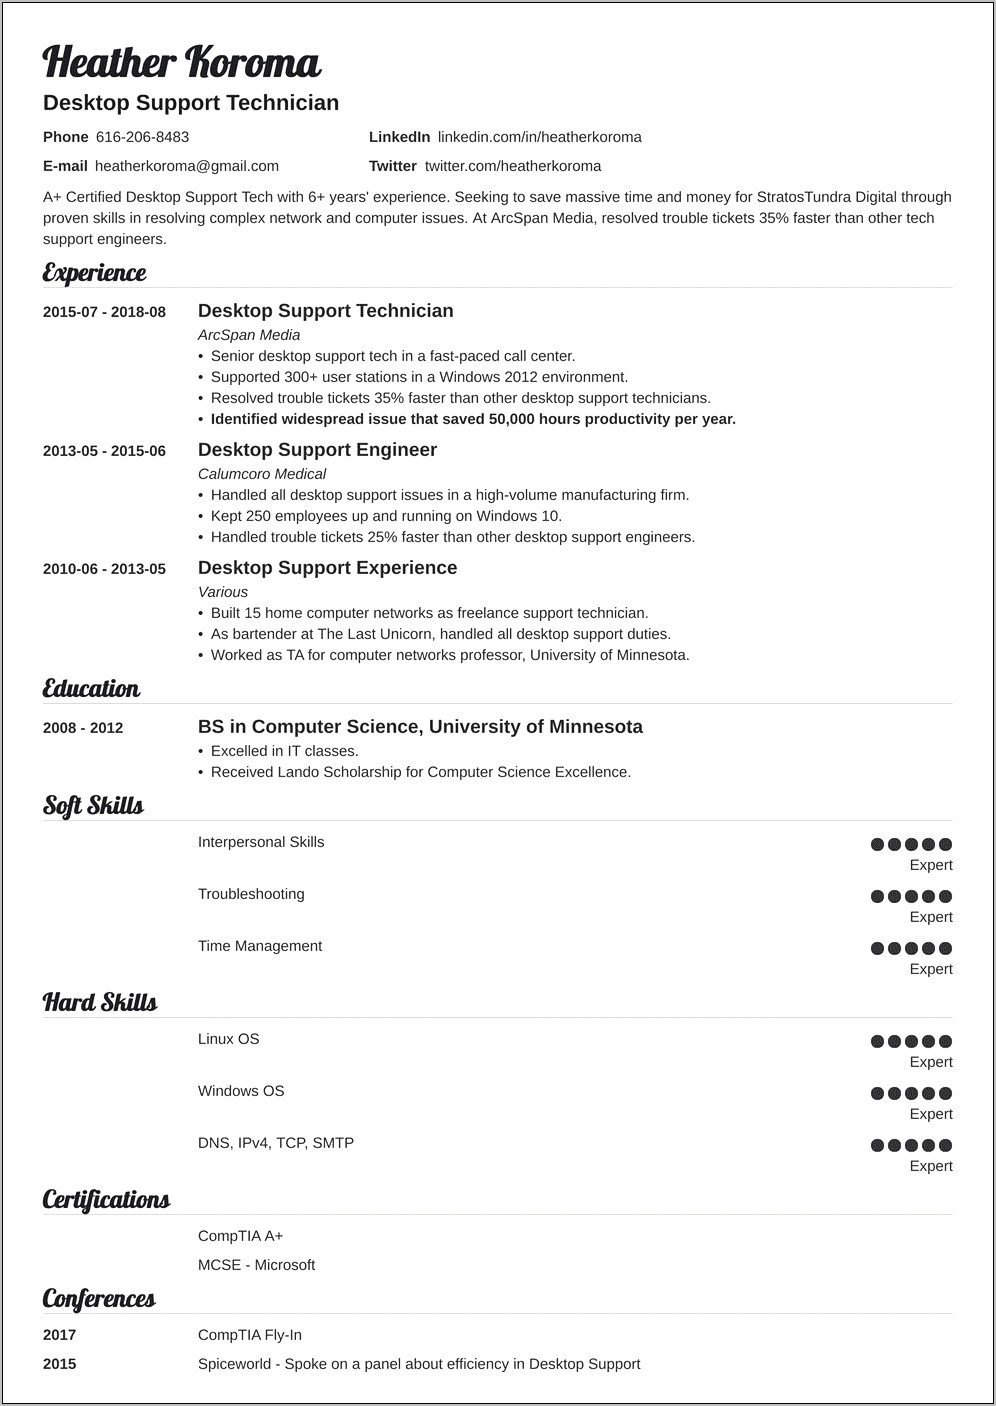 Book Keeping And Accounting Resume In Word Document